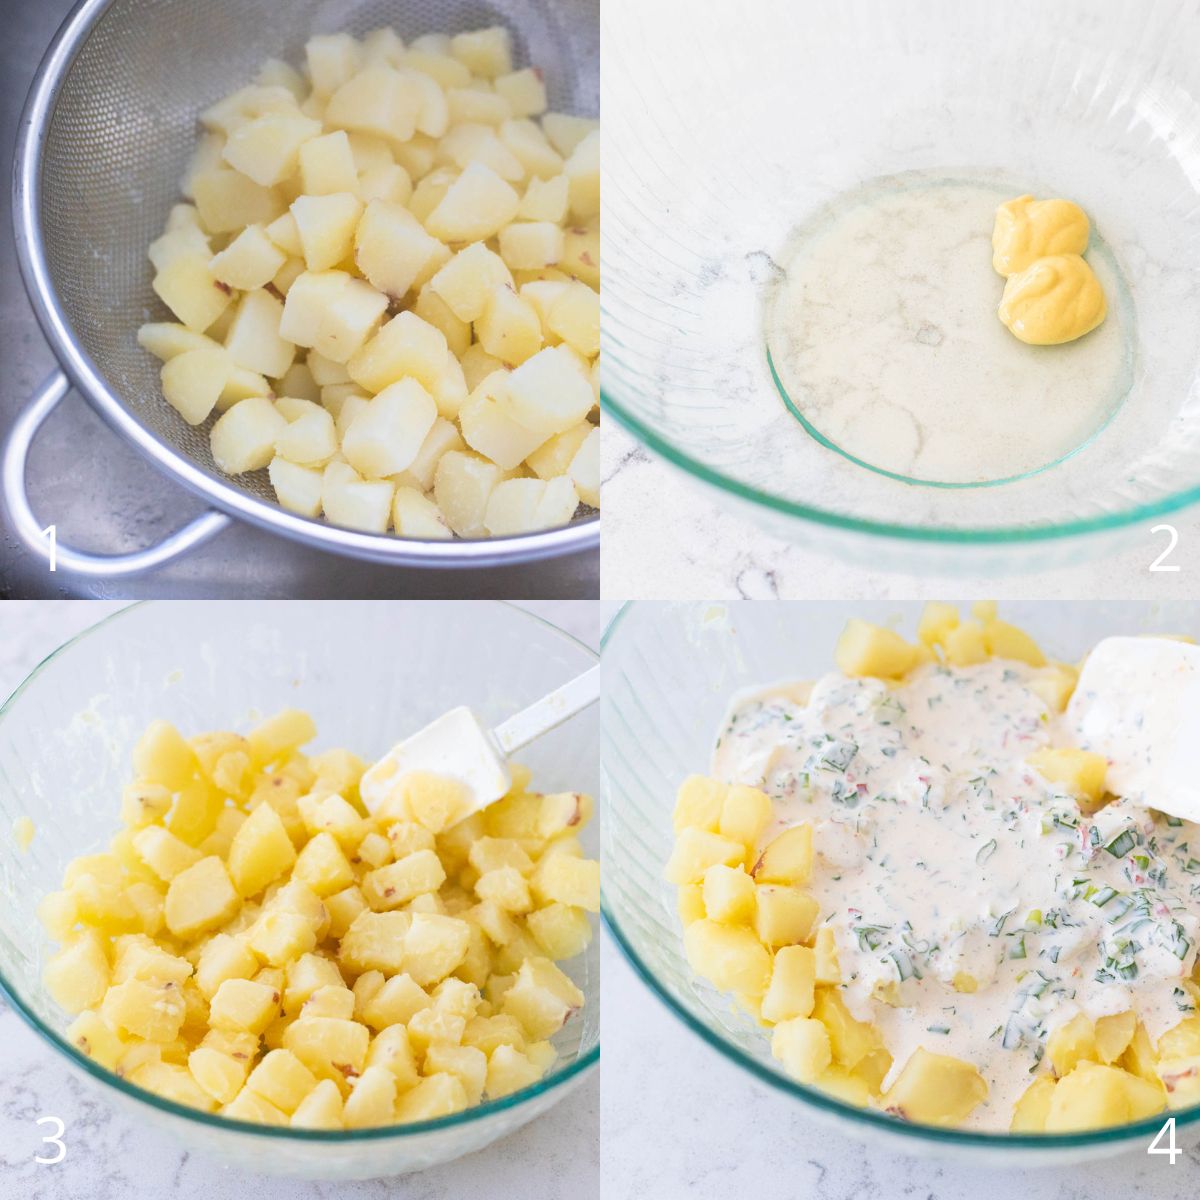 The step by step photos show how to assemble the potato salad in ranch dressing.